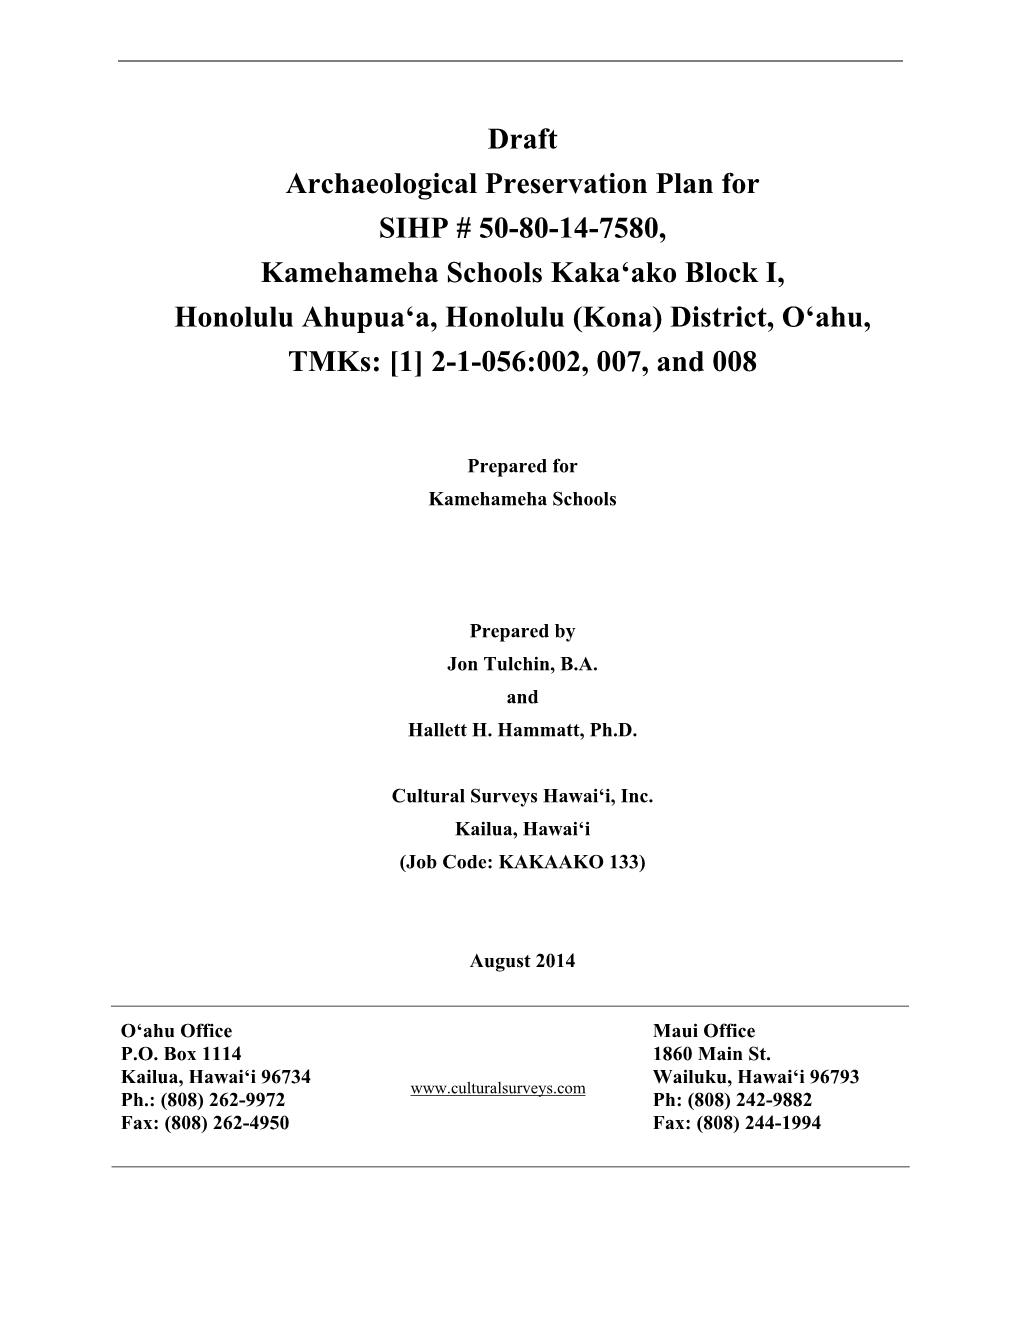 Draft Archaeological Preservation Plan for SIHP # 50-80-14-7580